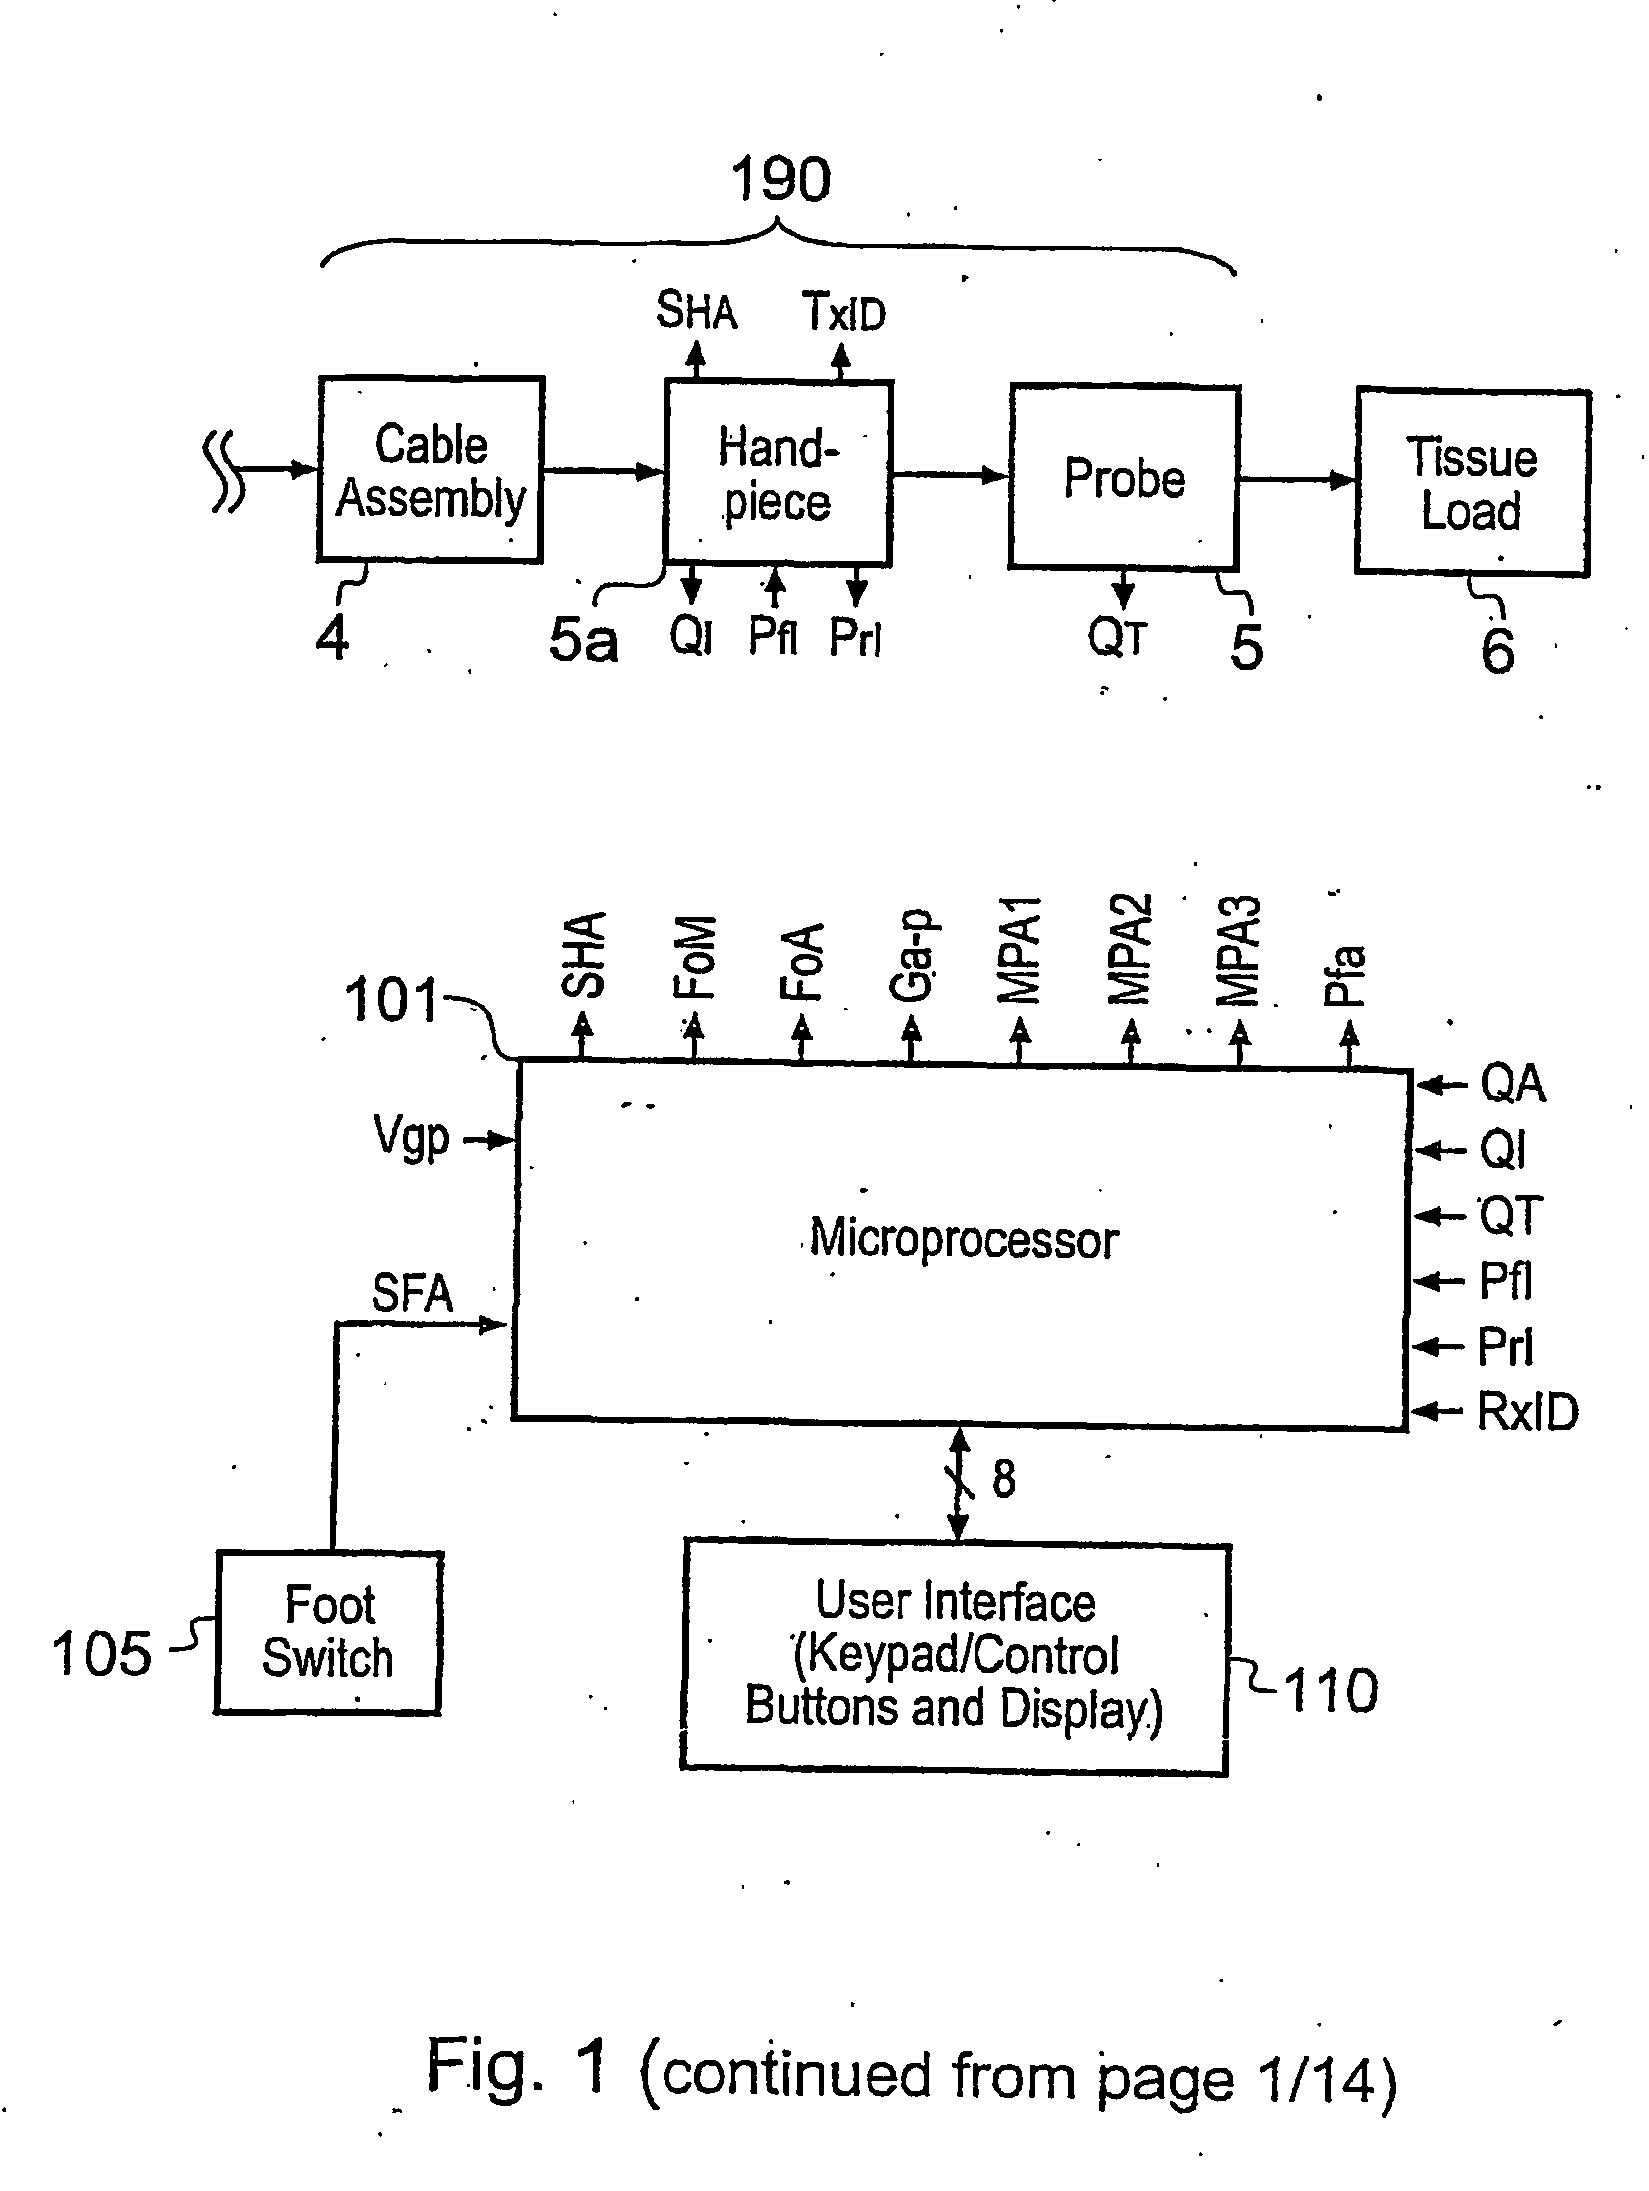 Tissue ablation apparatus and method of ablating tissue